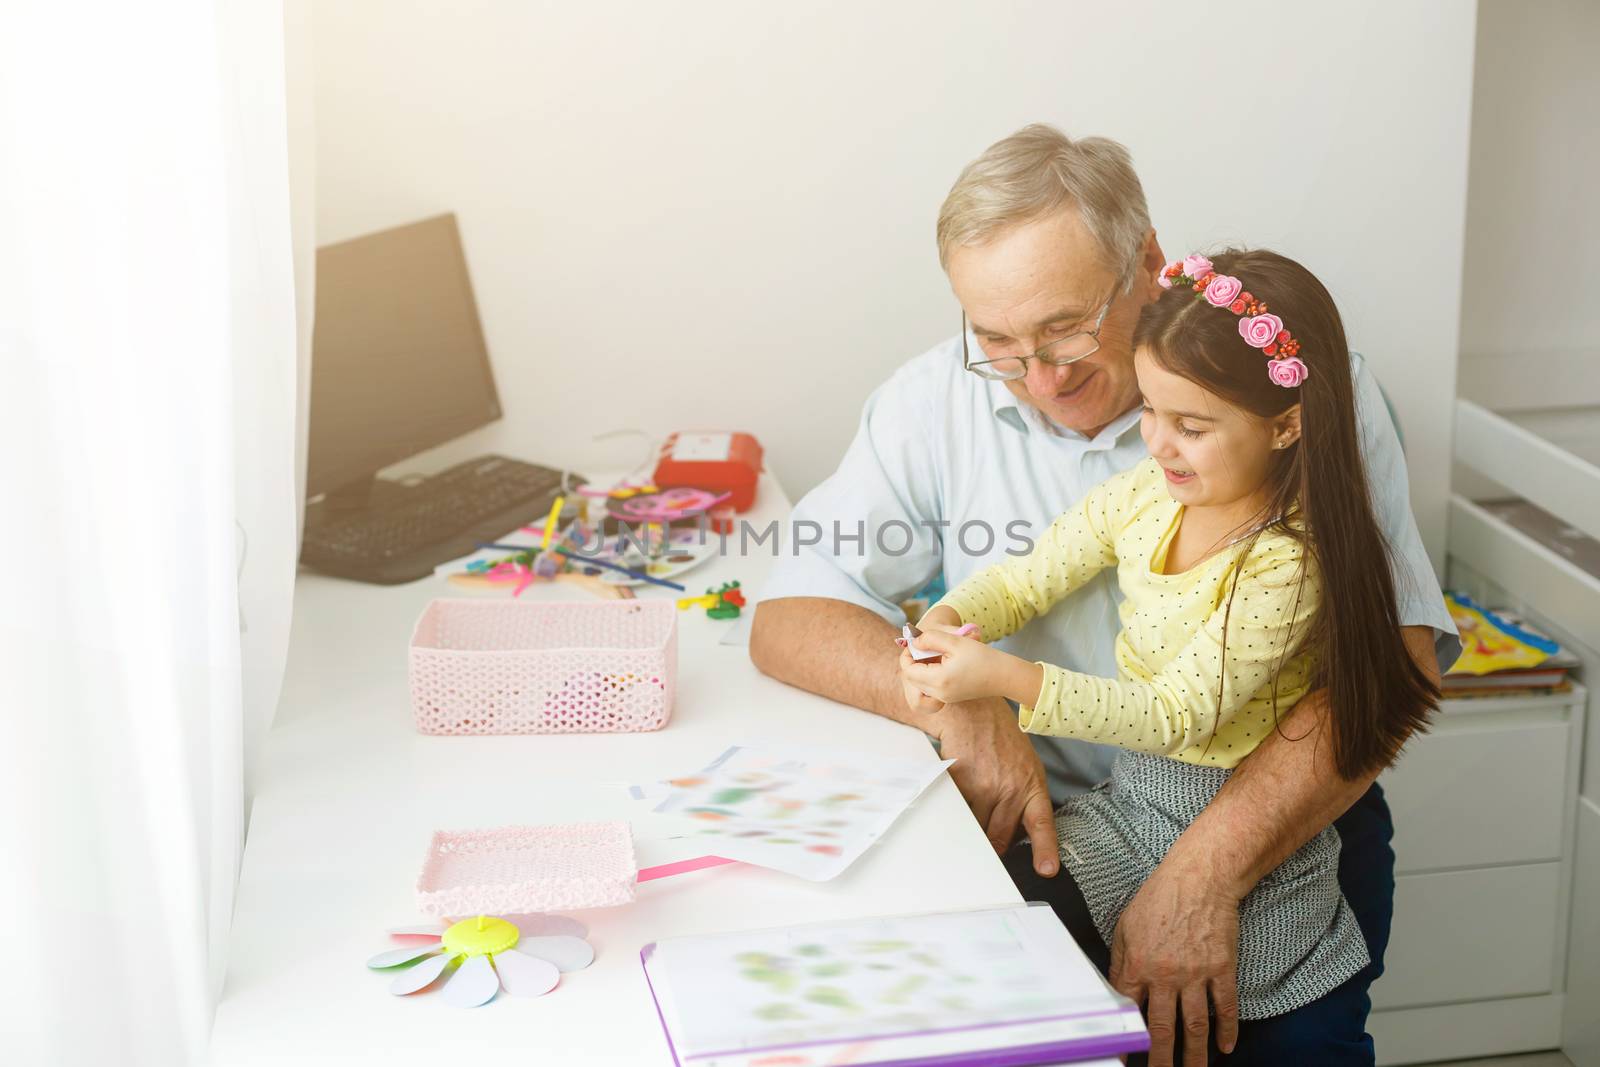 Caring grandfather doing home assignment together with granddaughter by Andelov13